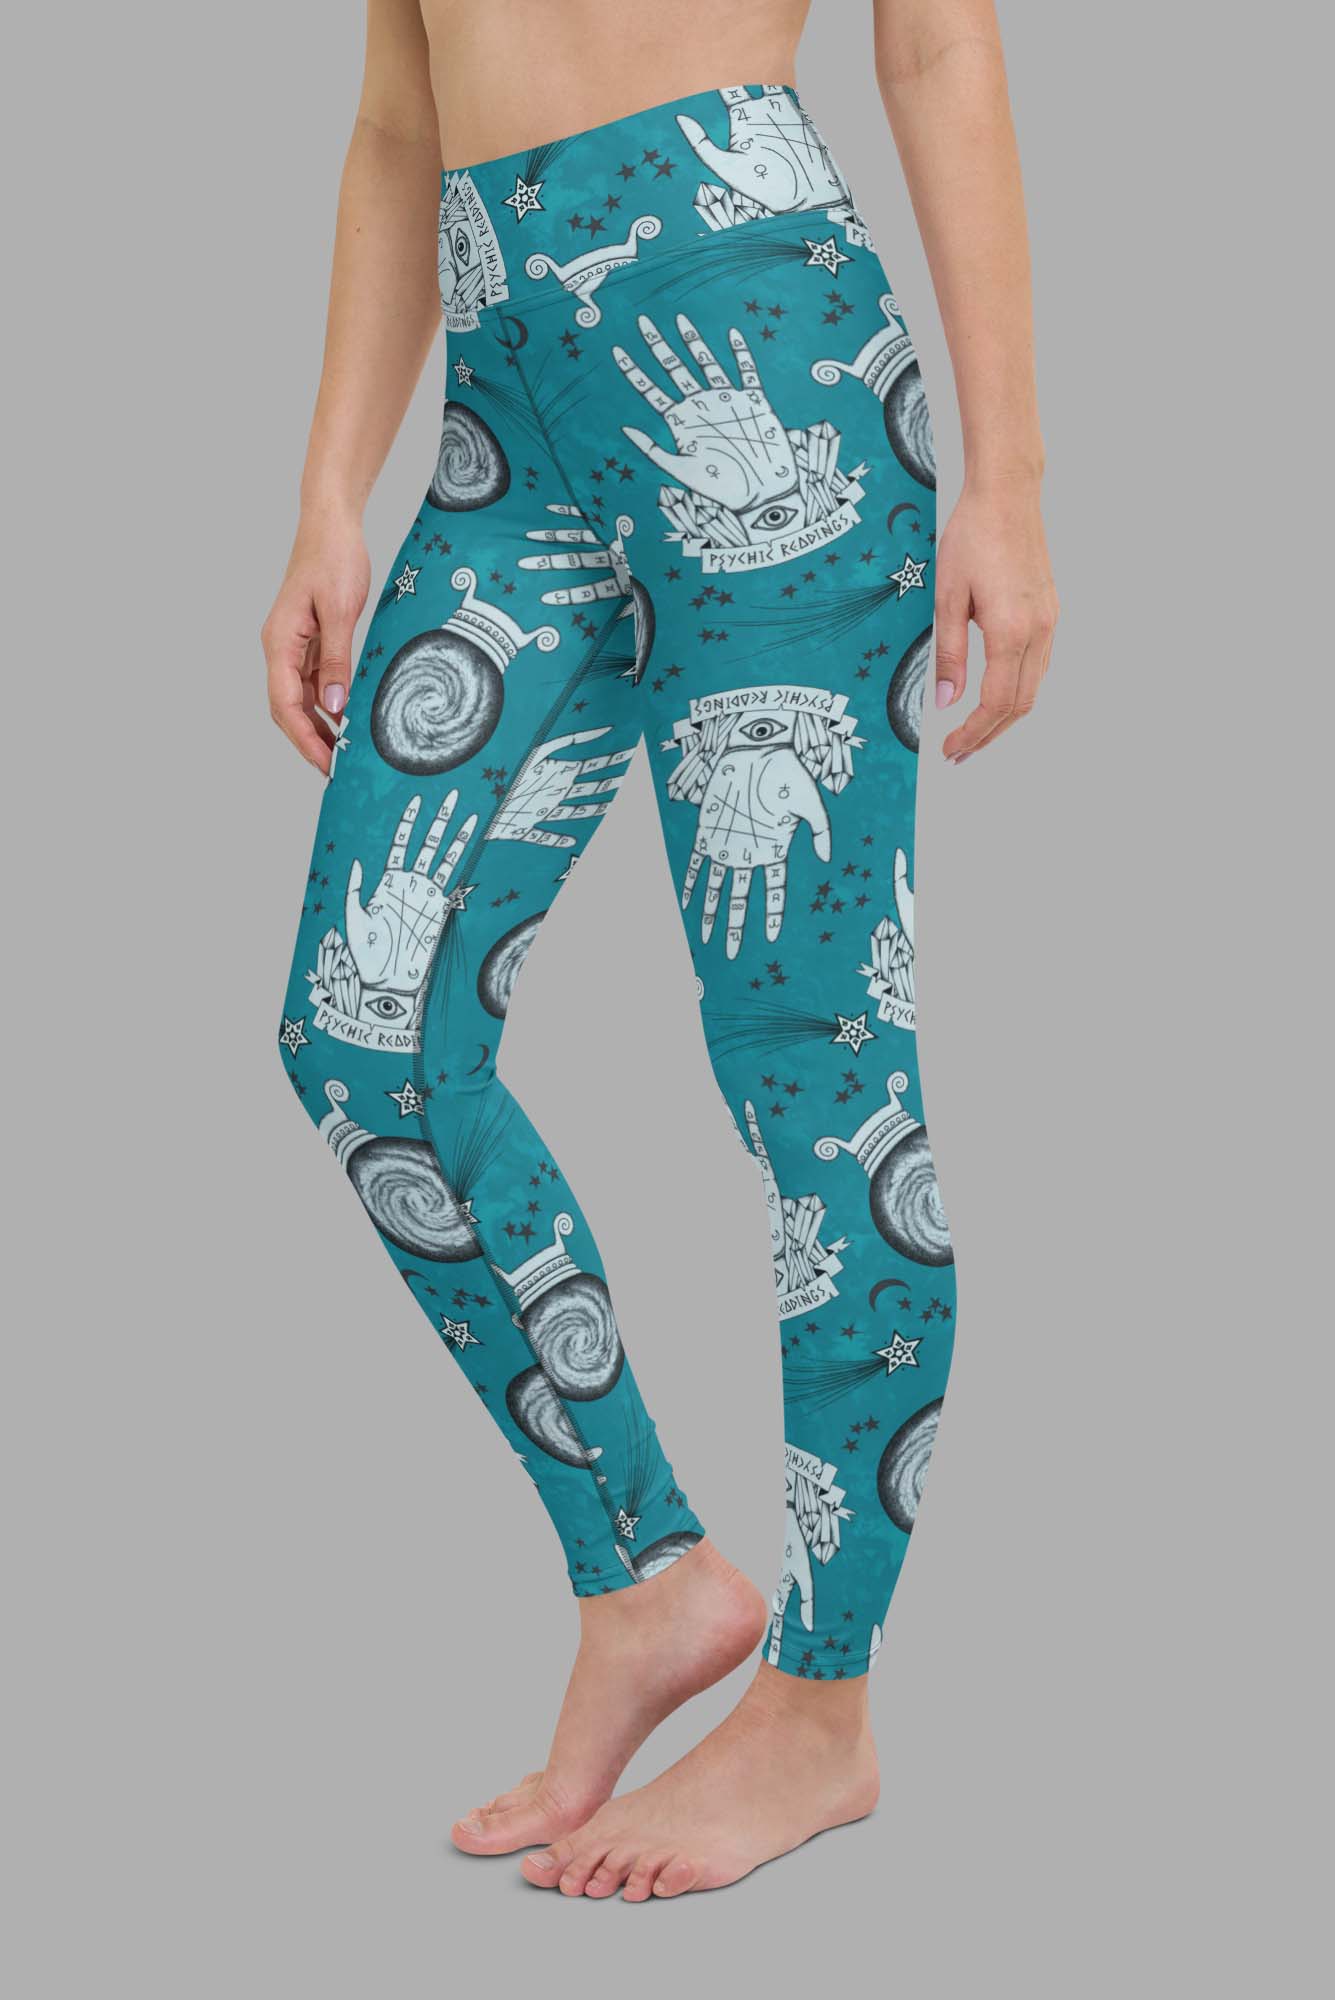 cosmic drifters clairvoyant print one piece yoga leggings side